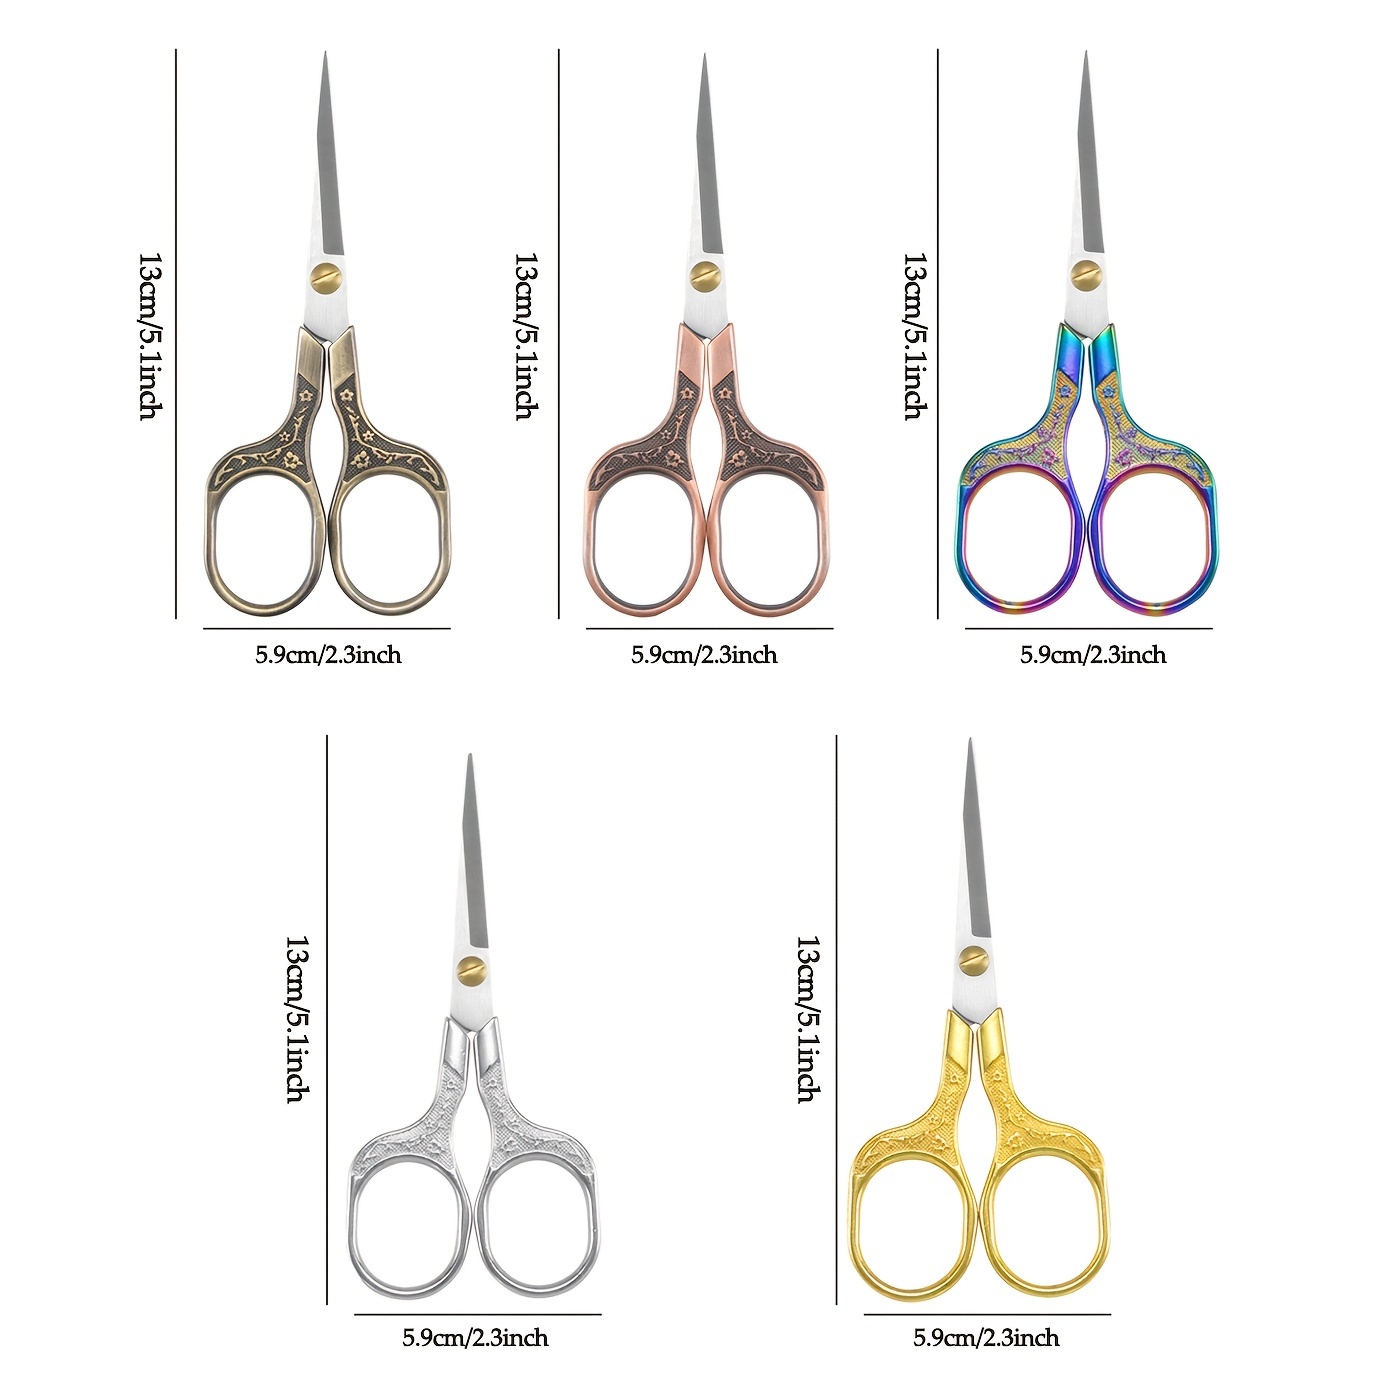 HITOPTY 5Inch Vintage Style Scissors Titanium Plating Stainless Steel Antique Shears for Craft Embroidery Crochet Needle Point Knitting Project